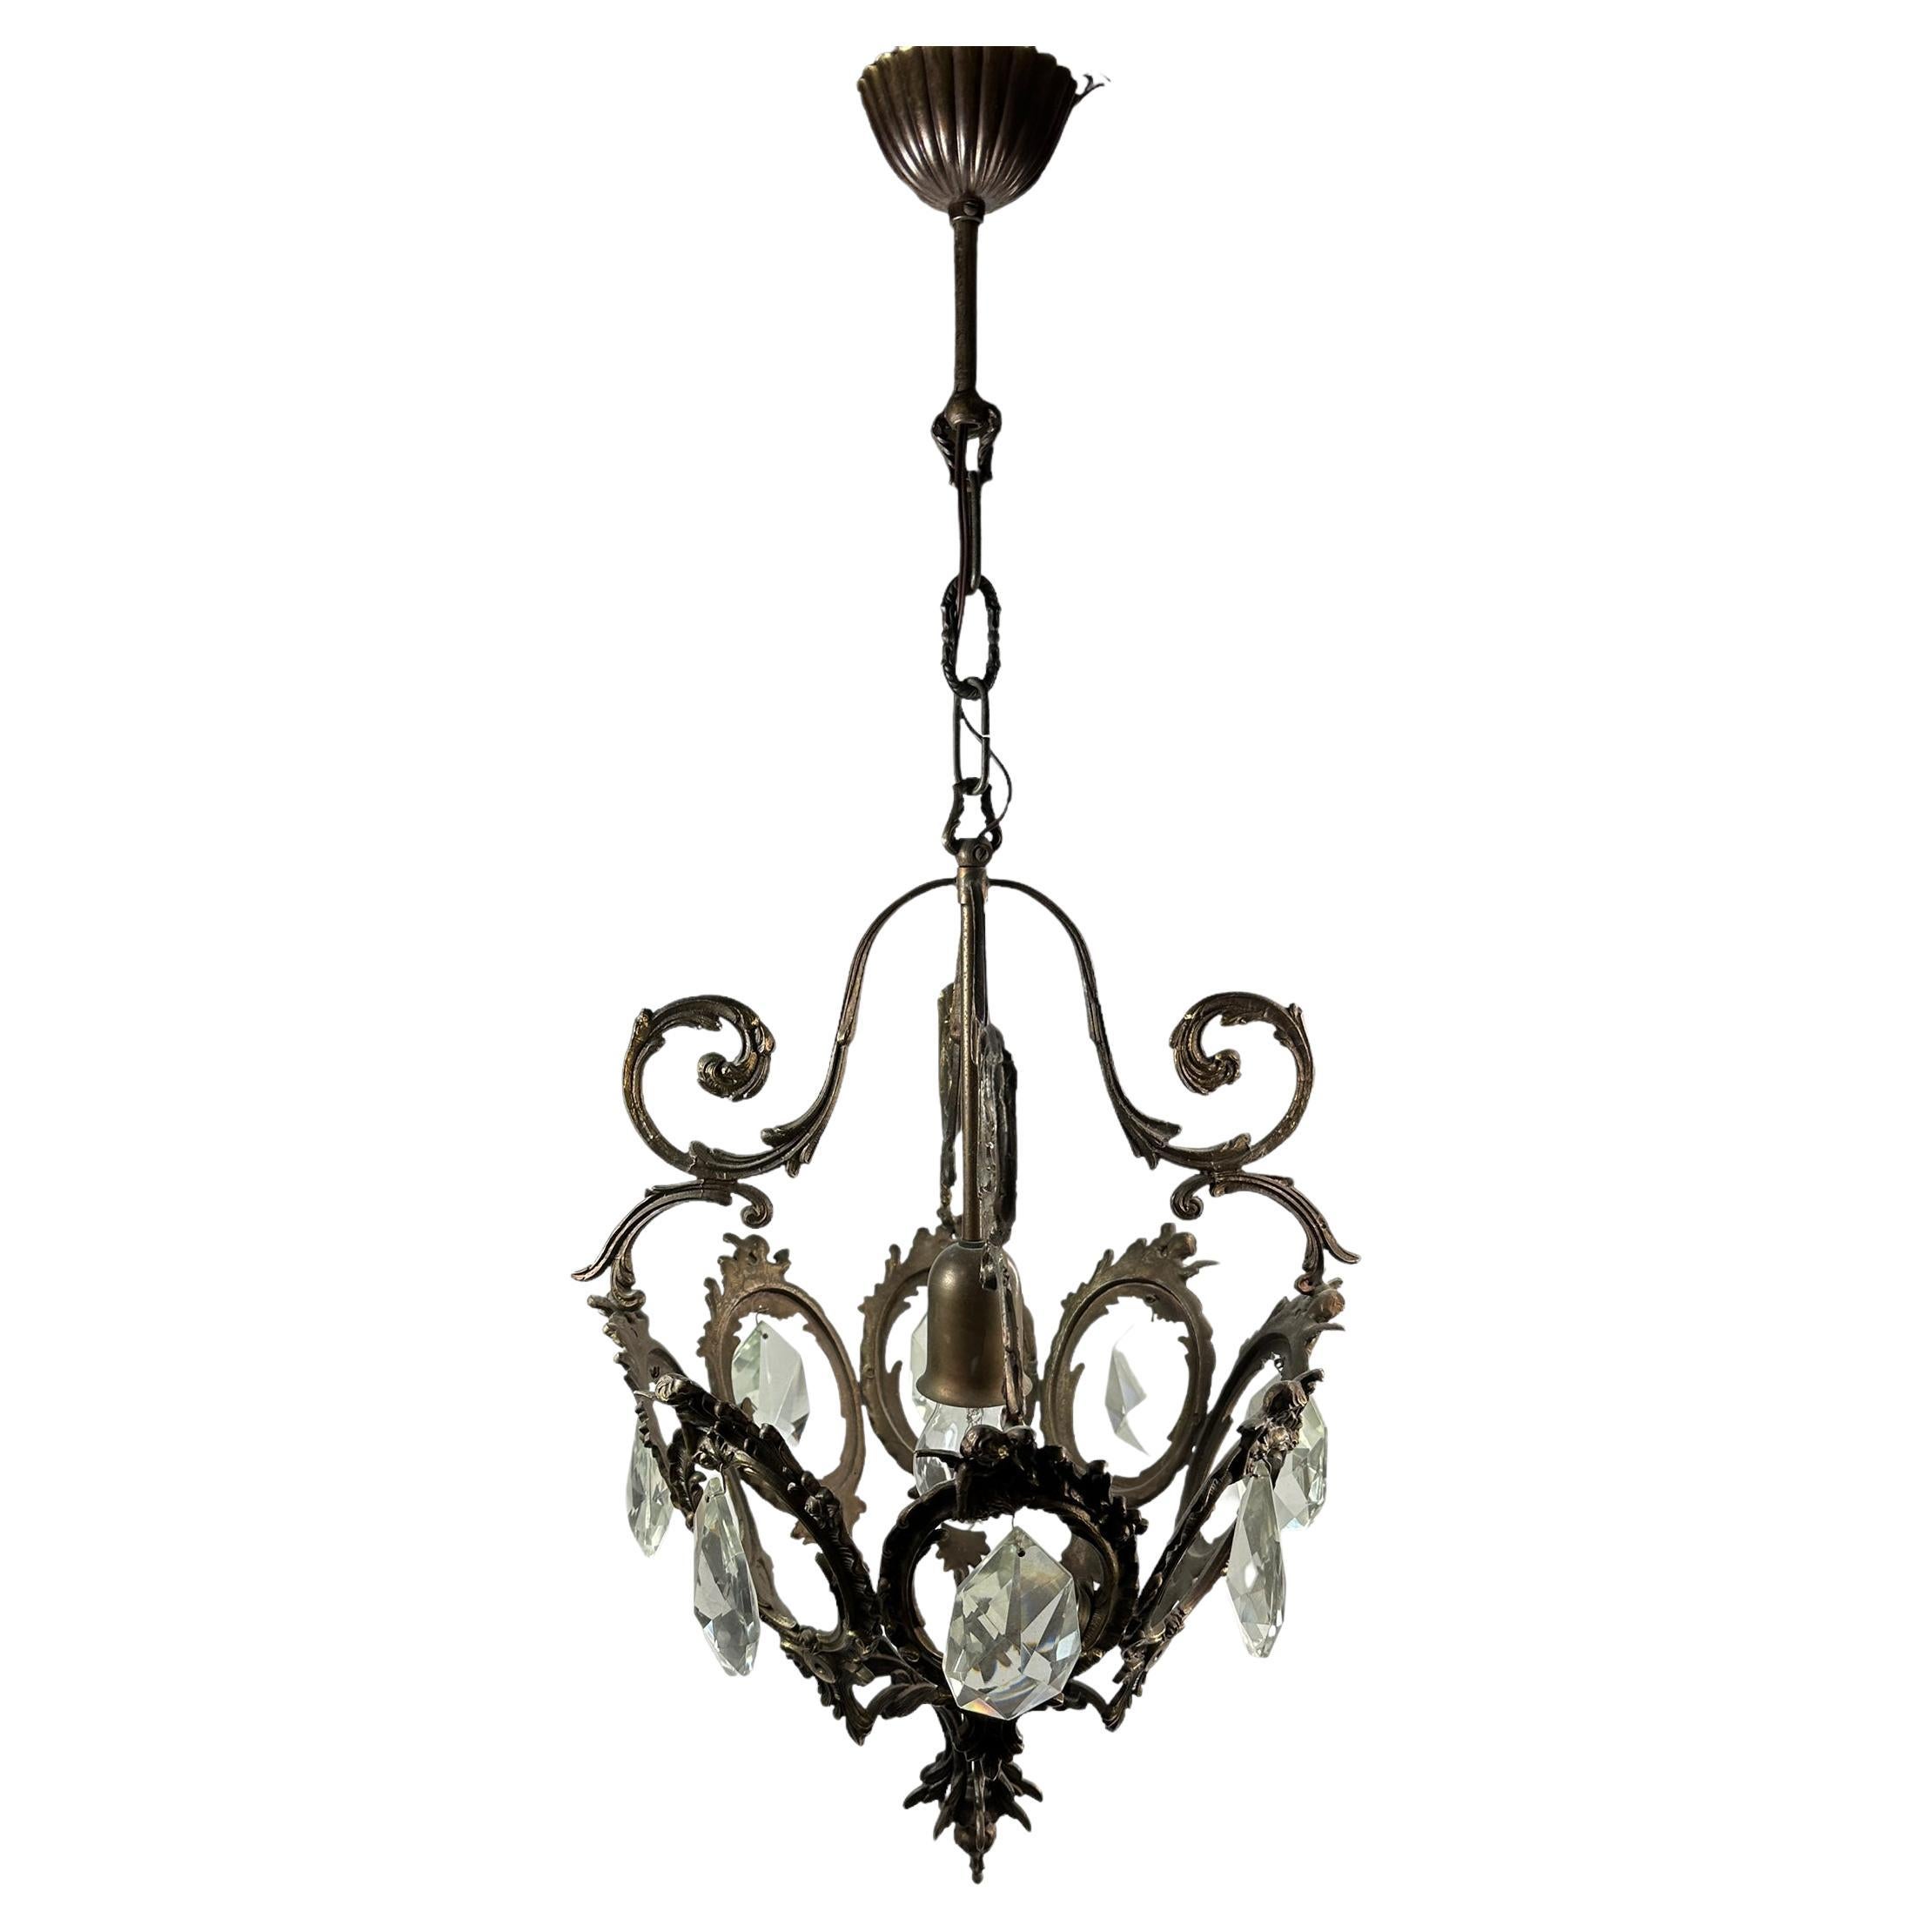 Maison Baguès Style Iron and Crystal Lantern Chandelier, Italy, 1950's For Sale